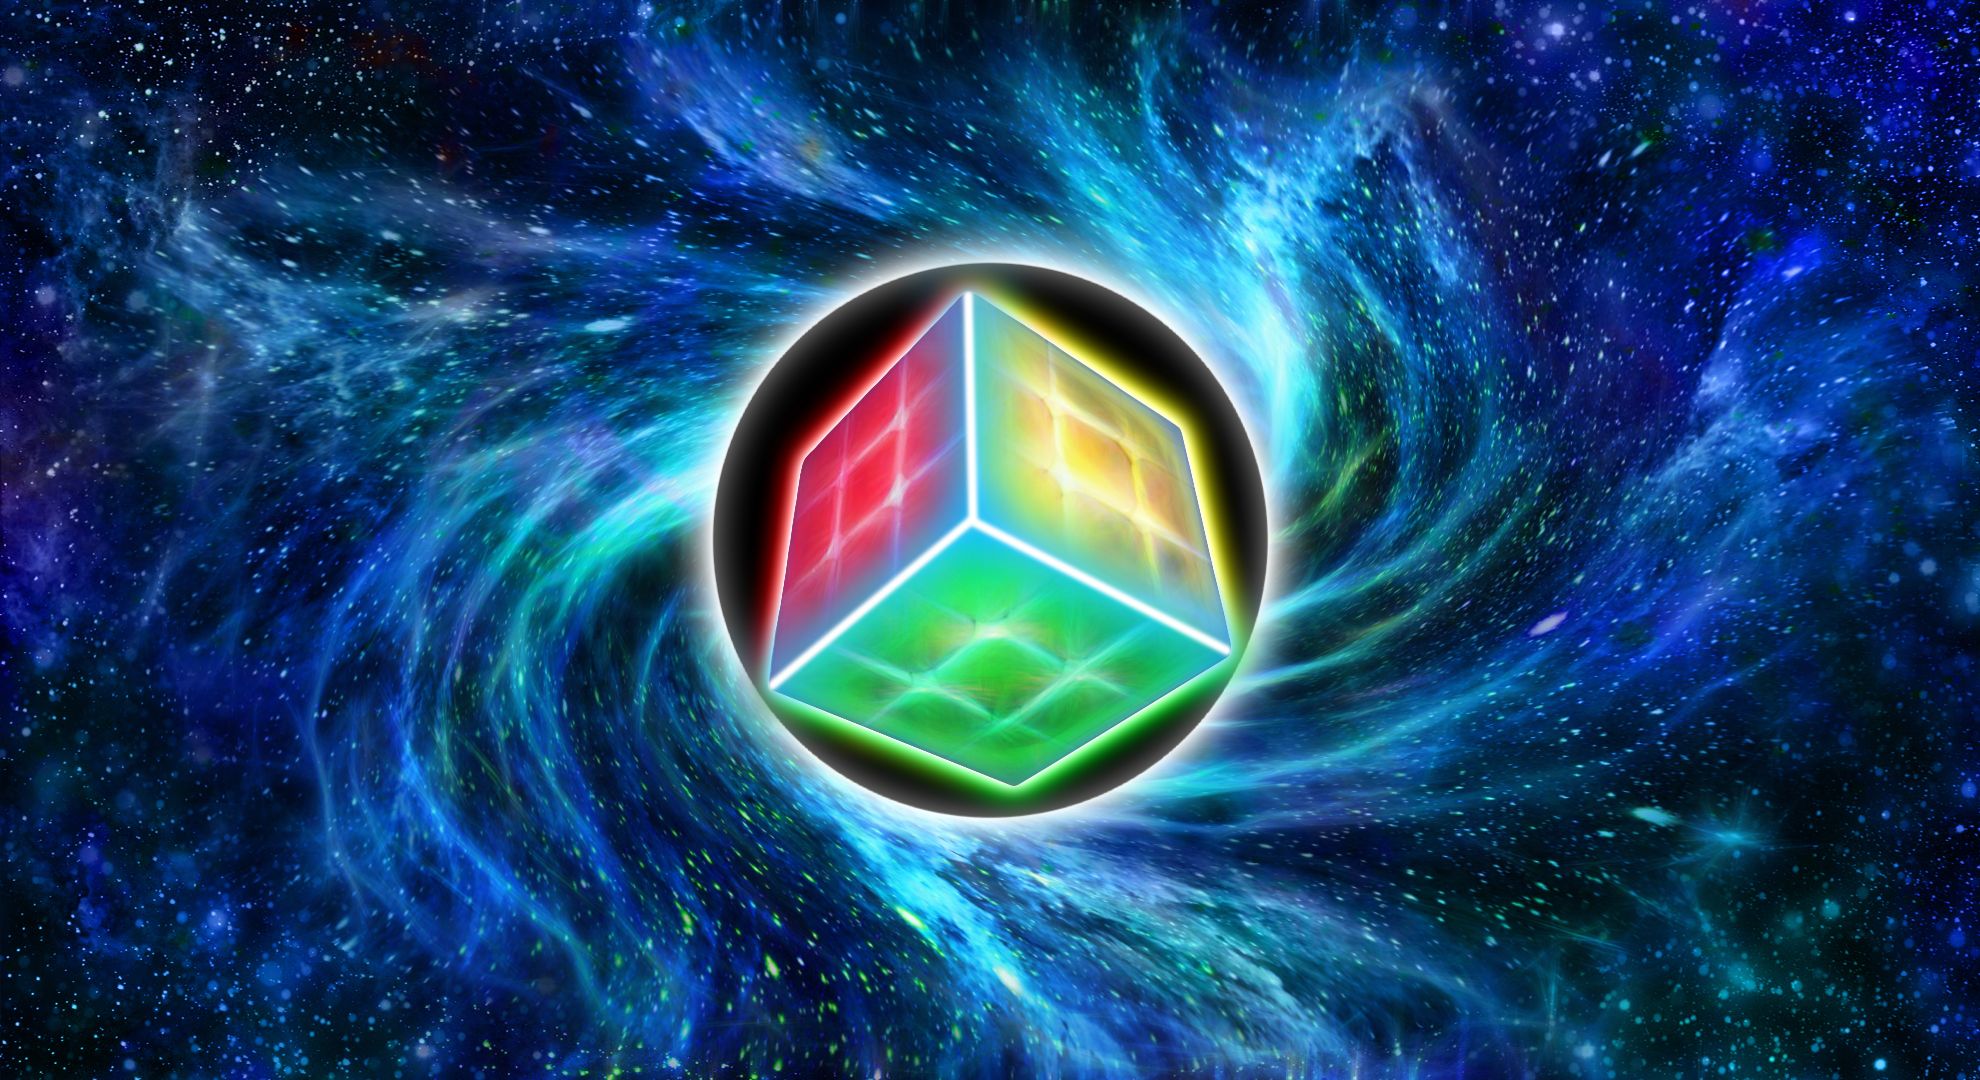 rubik's cube, black hole, abstract, cube, space